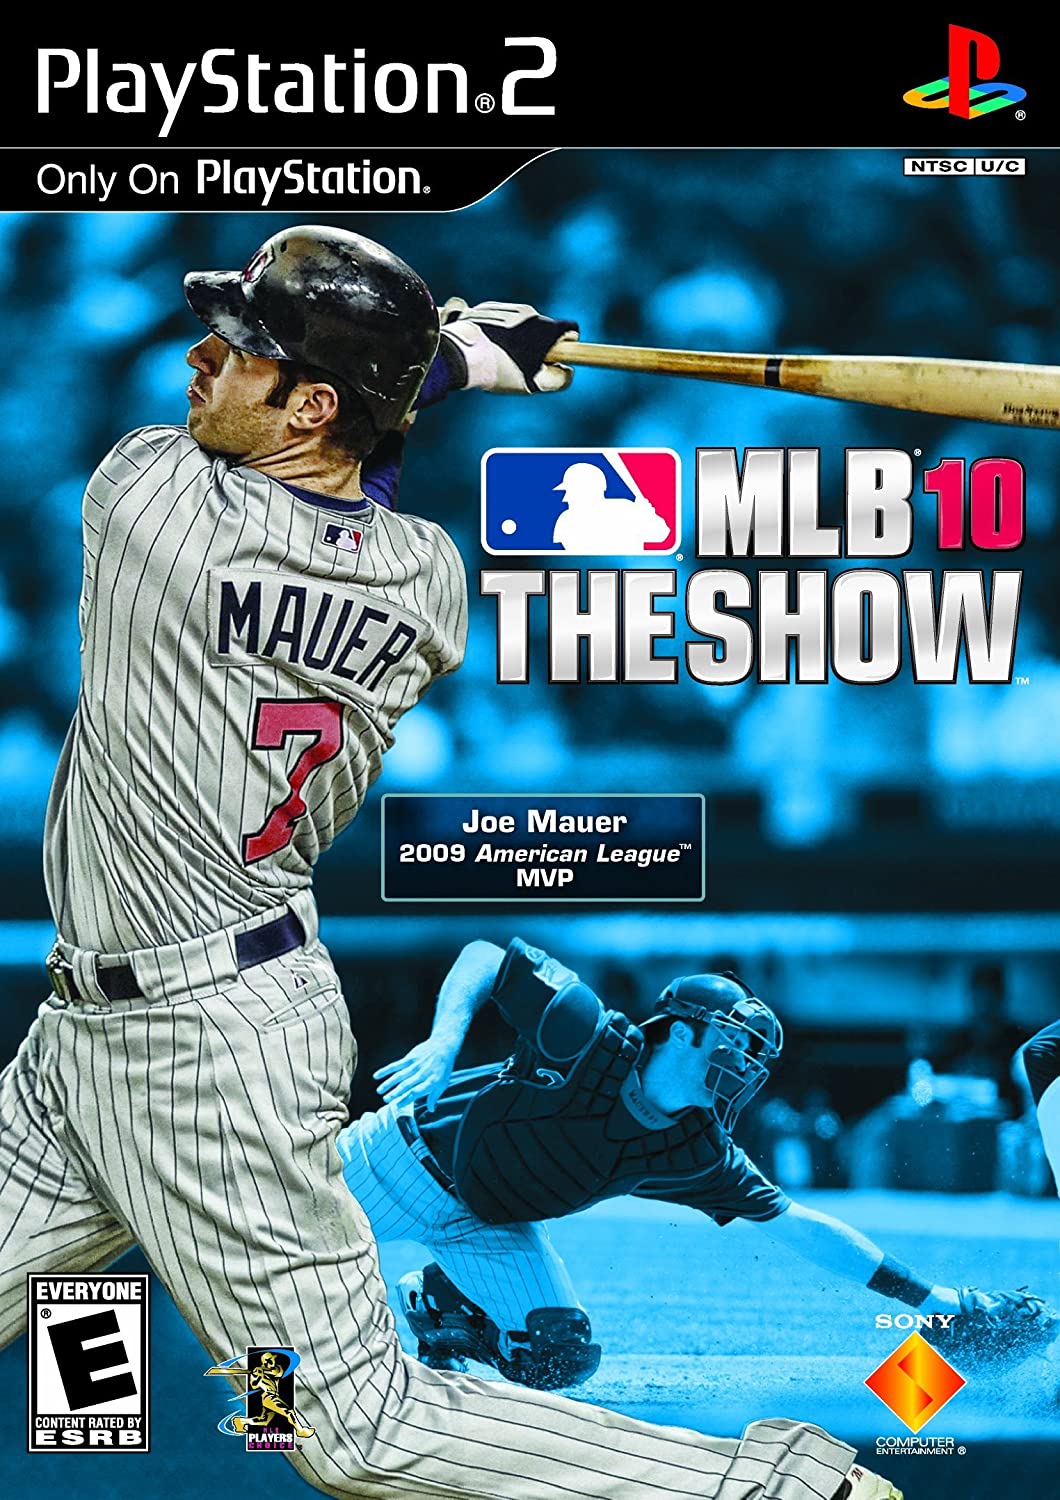 Joe Mauer Unleashed His Fire At The Plate - TPT Originals